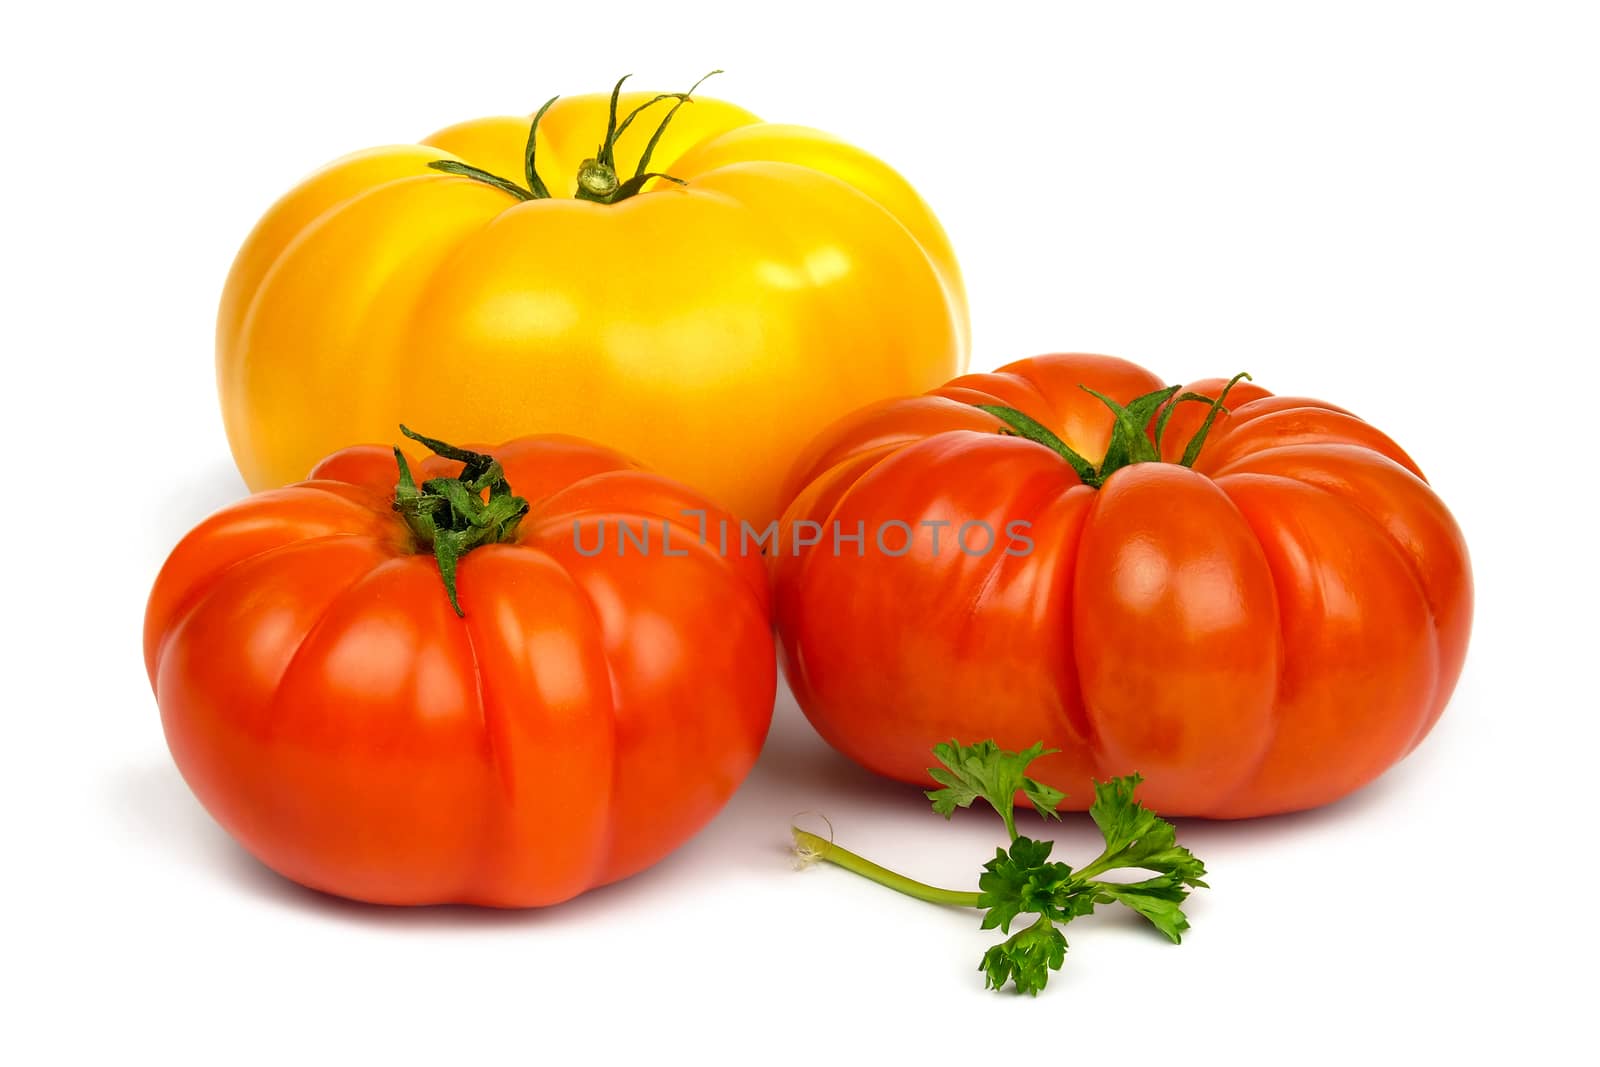 Fresh ripe red and yelloy tomatoes and a sprig of parsley  isolated on white background.